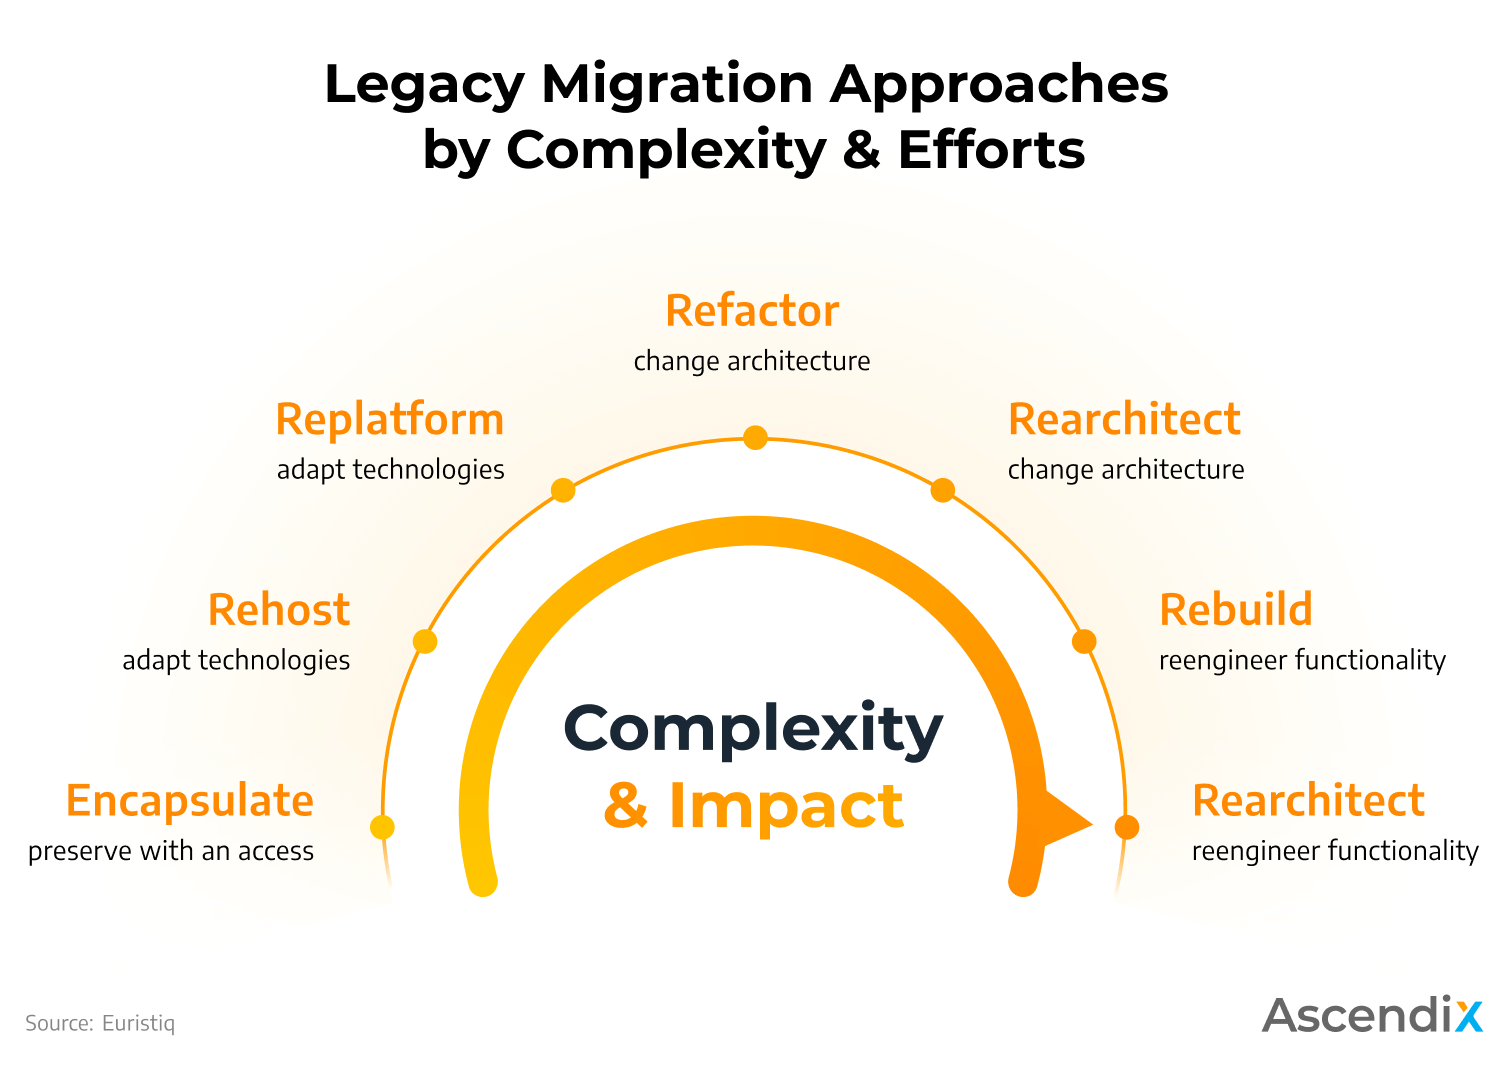 Legacy Code Migration Approaches By Complexity and Efforts